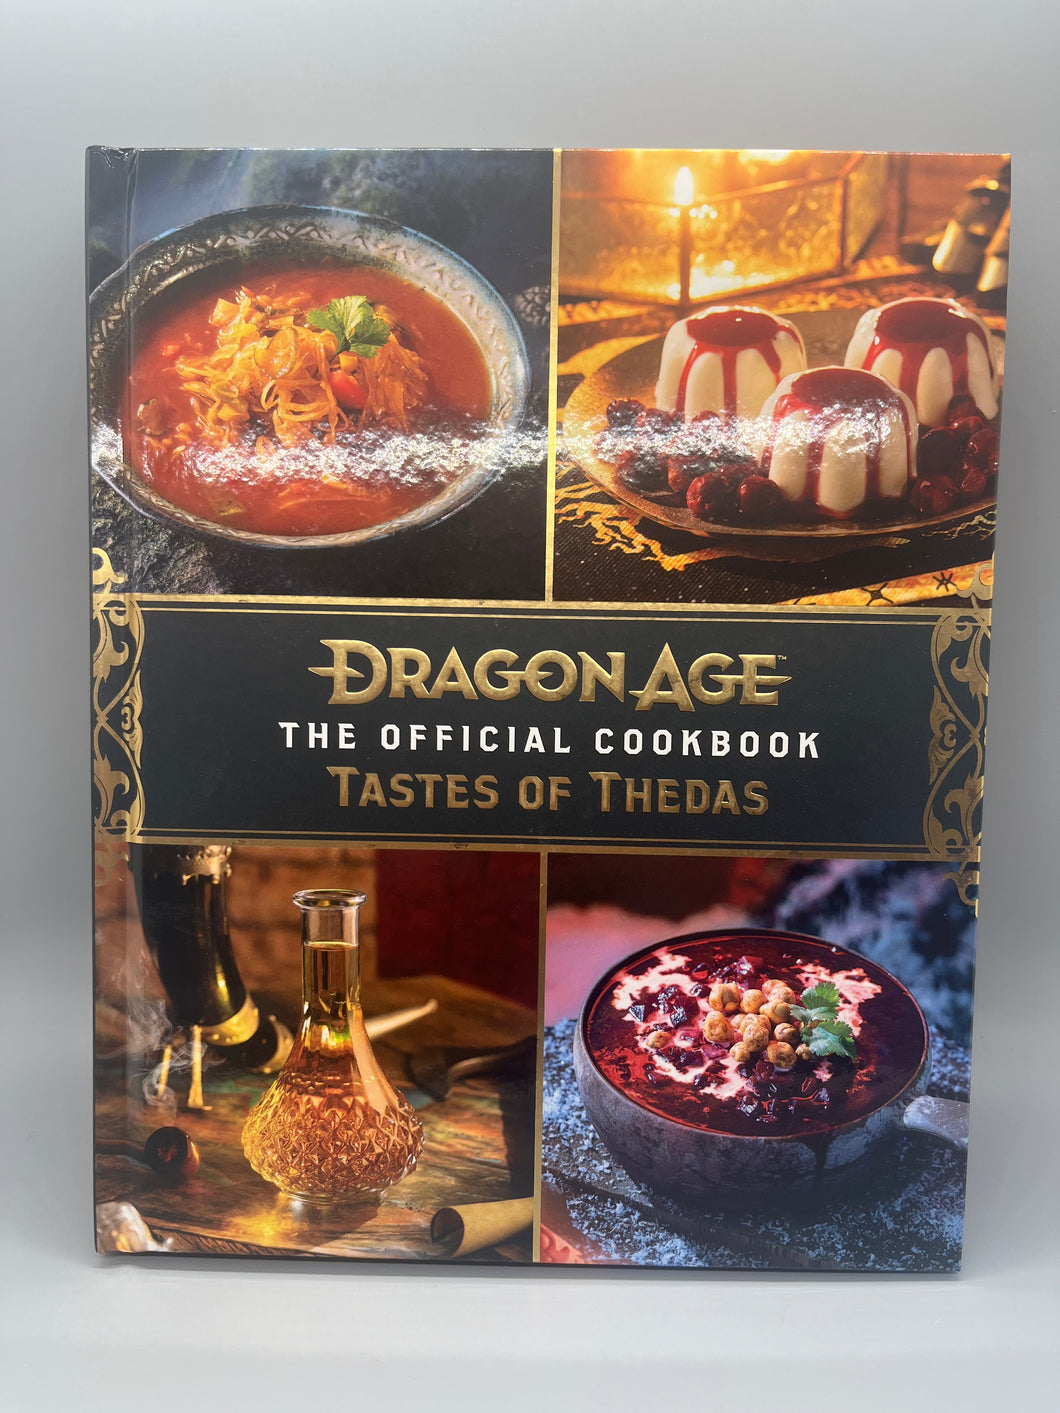 Dragon Age: The Official Cookbook Tastes of Thedas